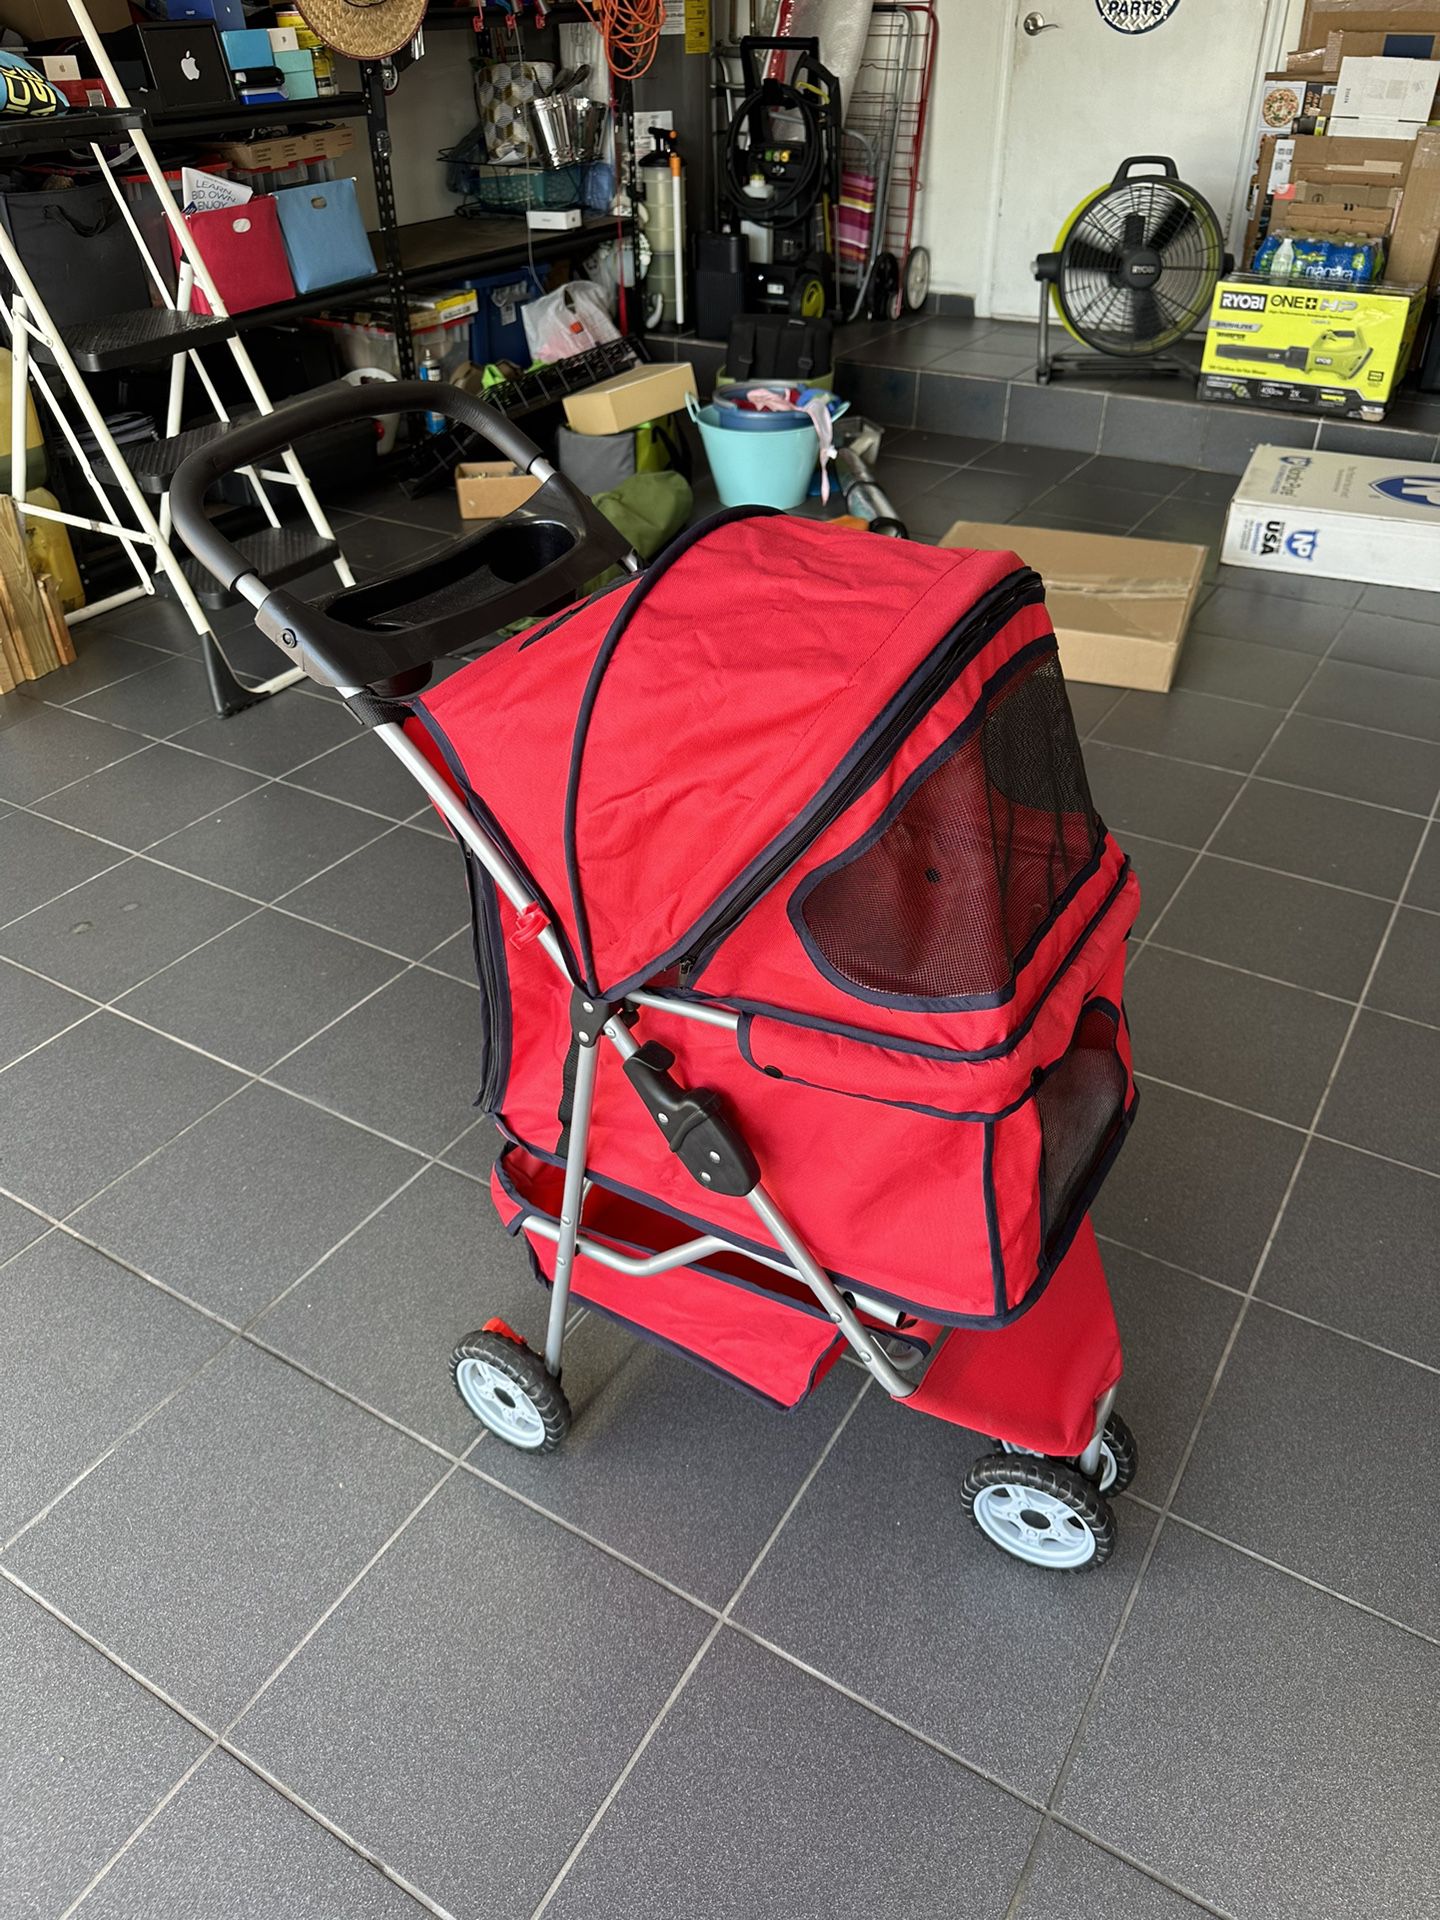 Folding Pet Stroller For Medium Dogs And Cats.